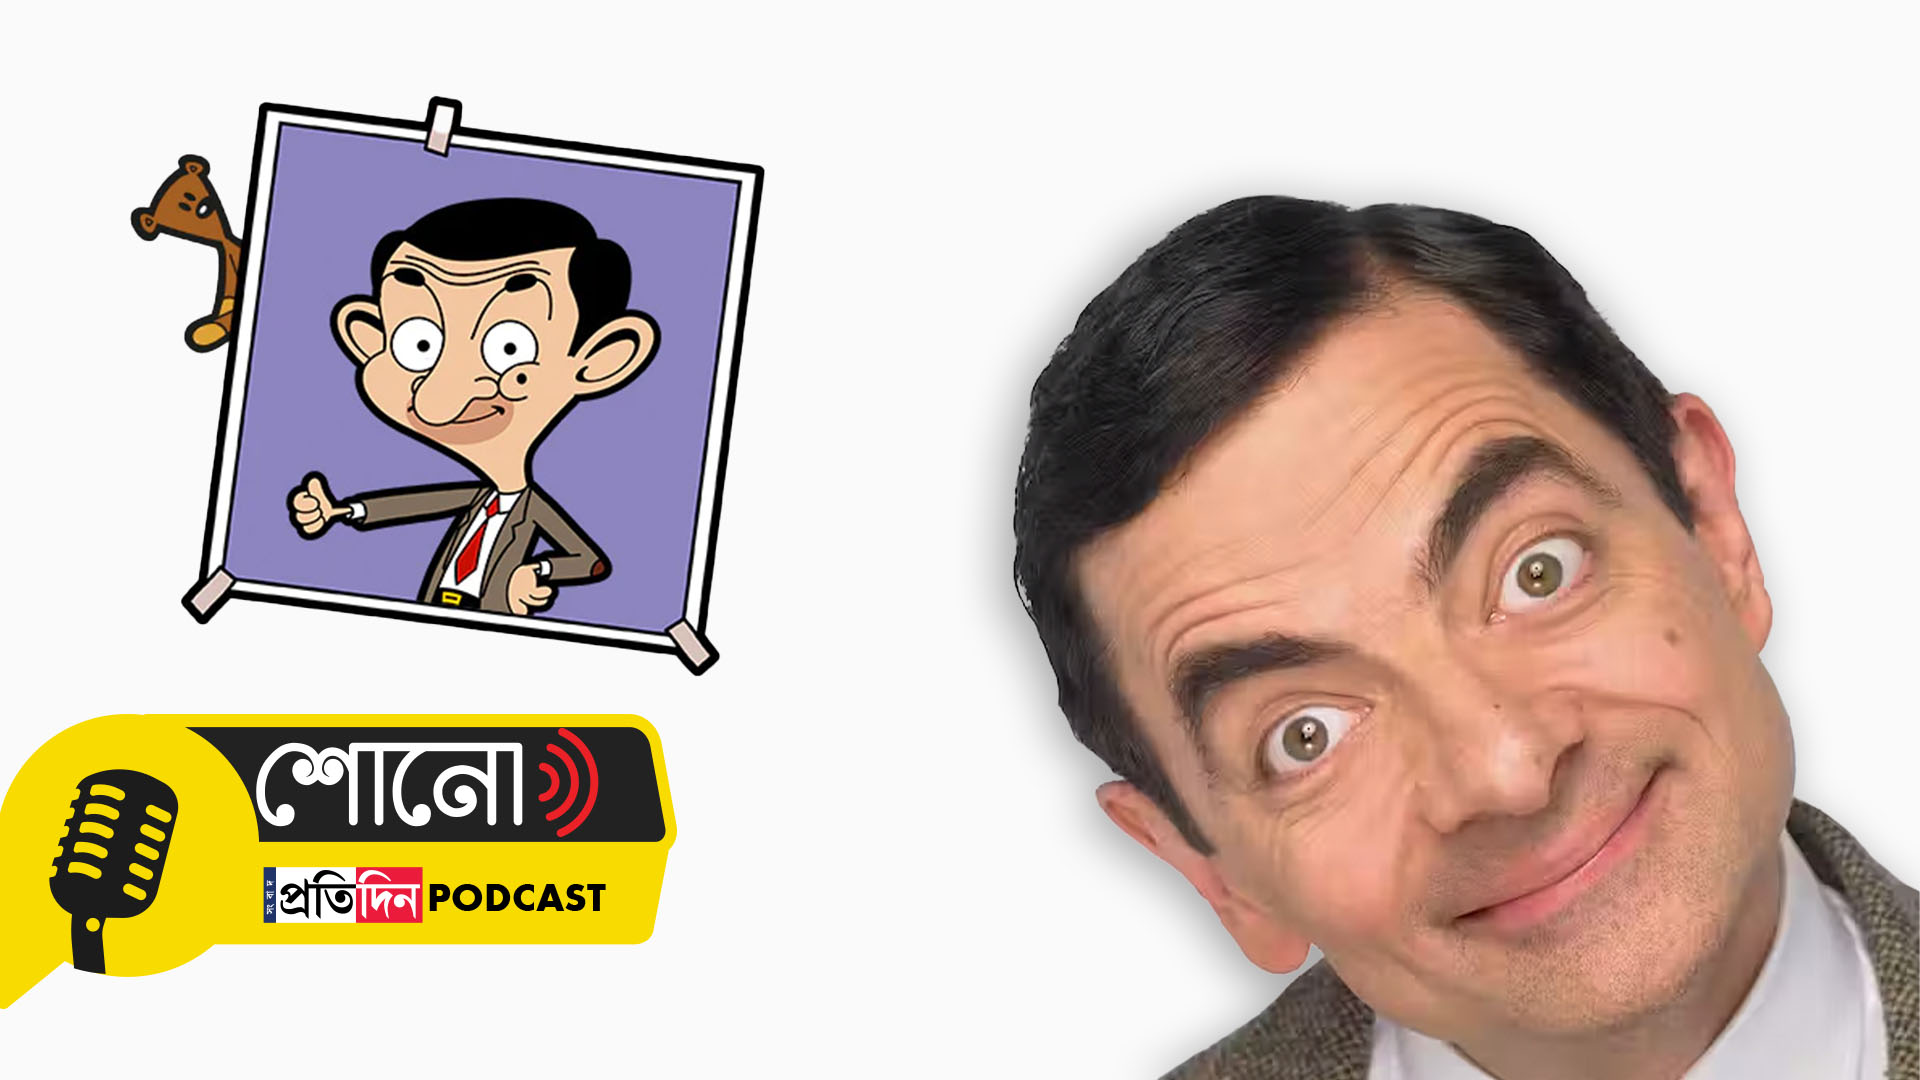 Famous series Mr. Bean could have been named after another vegetable